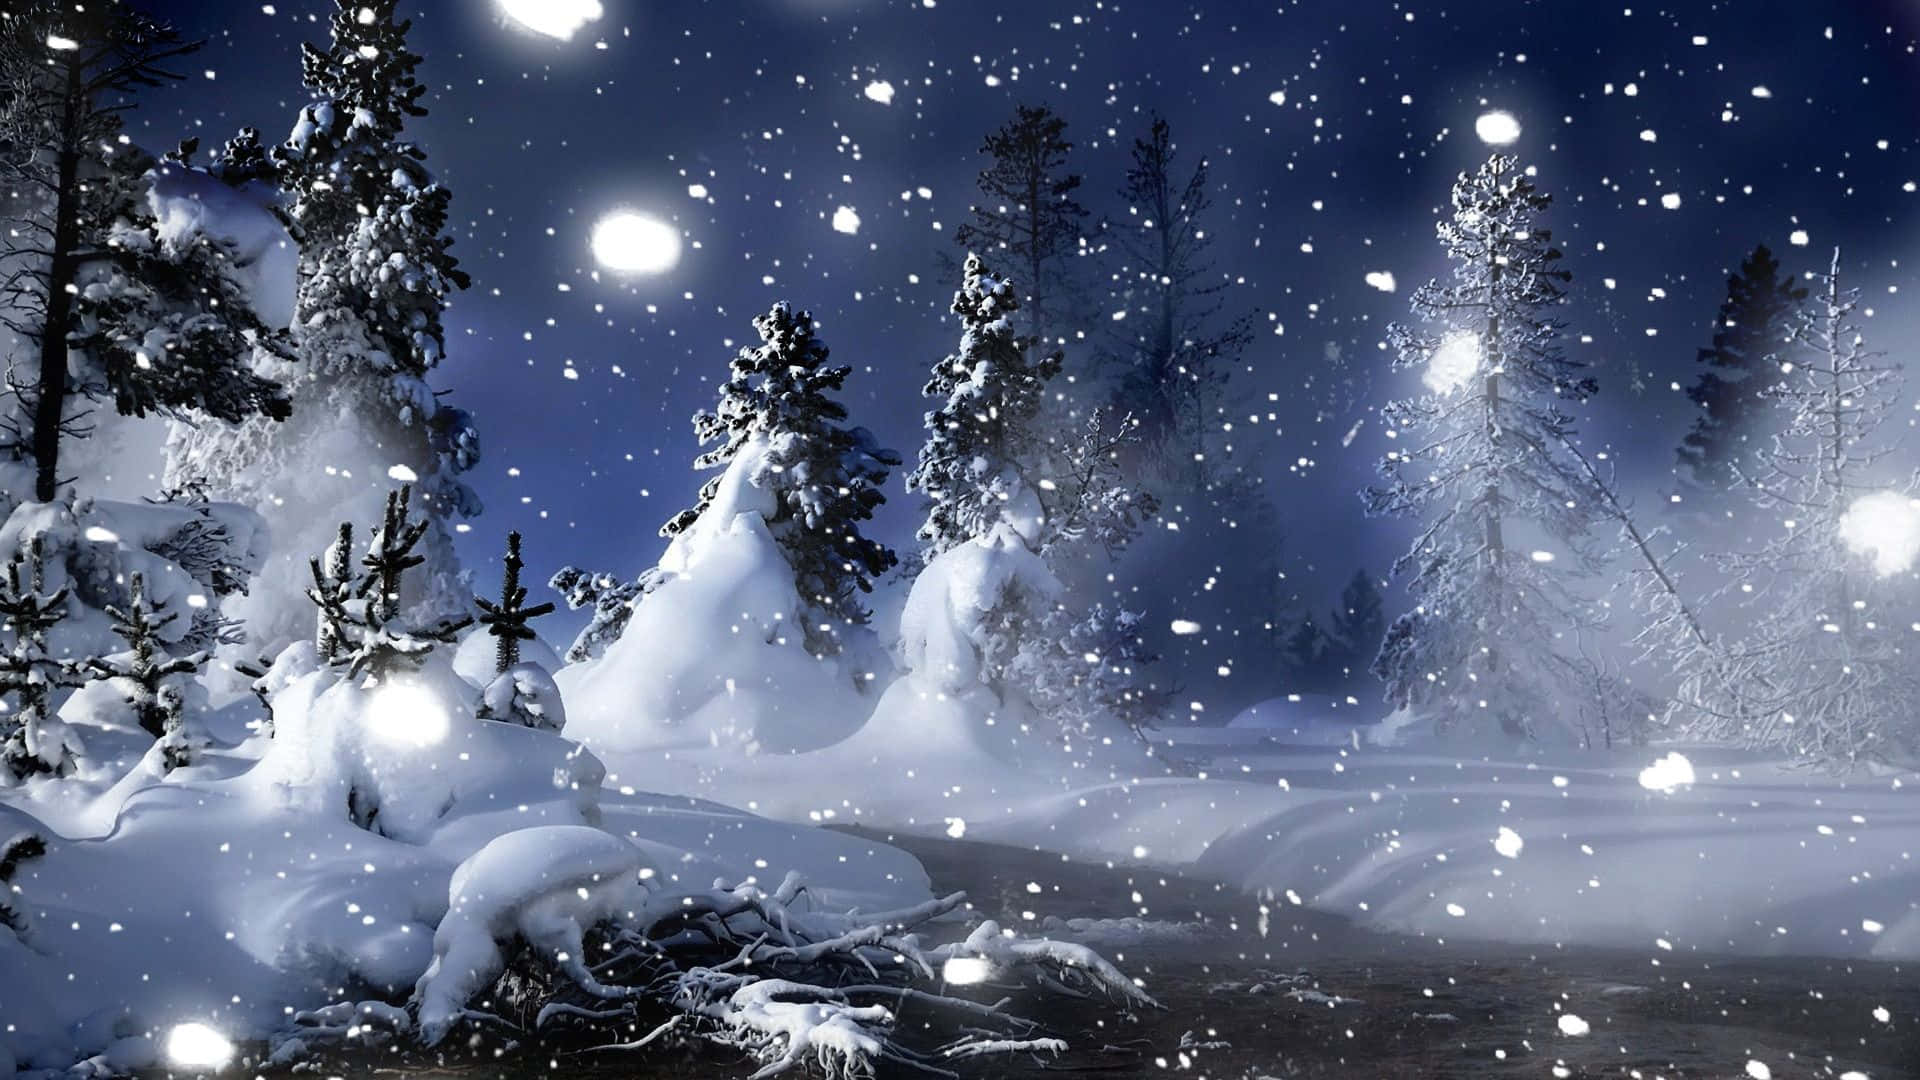 "The magical frosty Christmas landscape casts a winter wonderland spell." Wallpaper